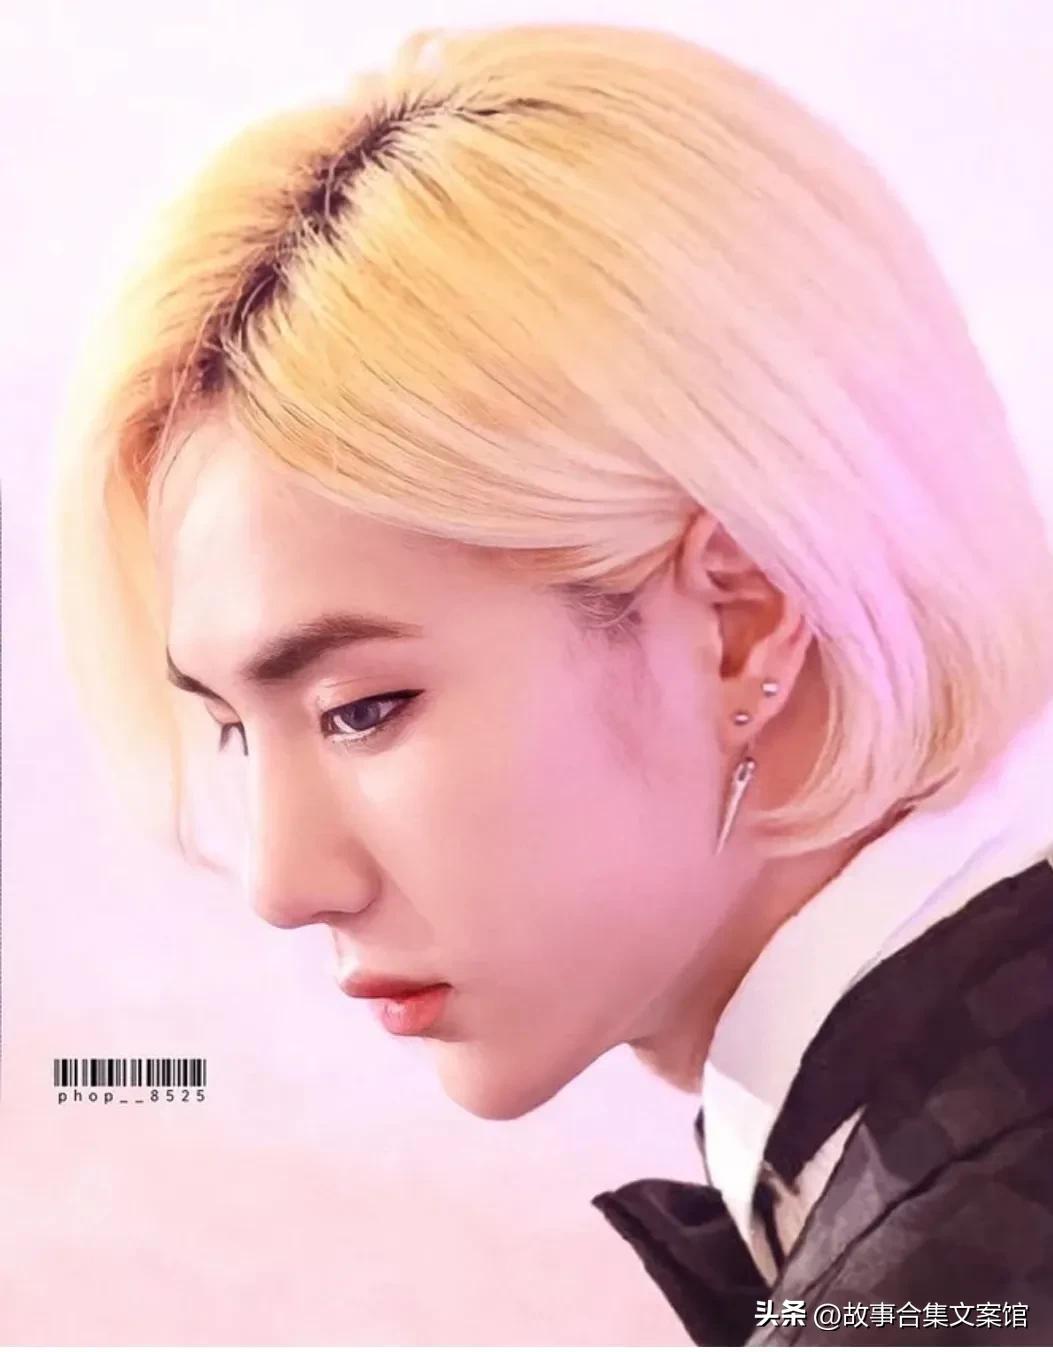 Wang Yibo's early photos of white peony, with blond hair, look good - iNEWS